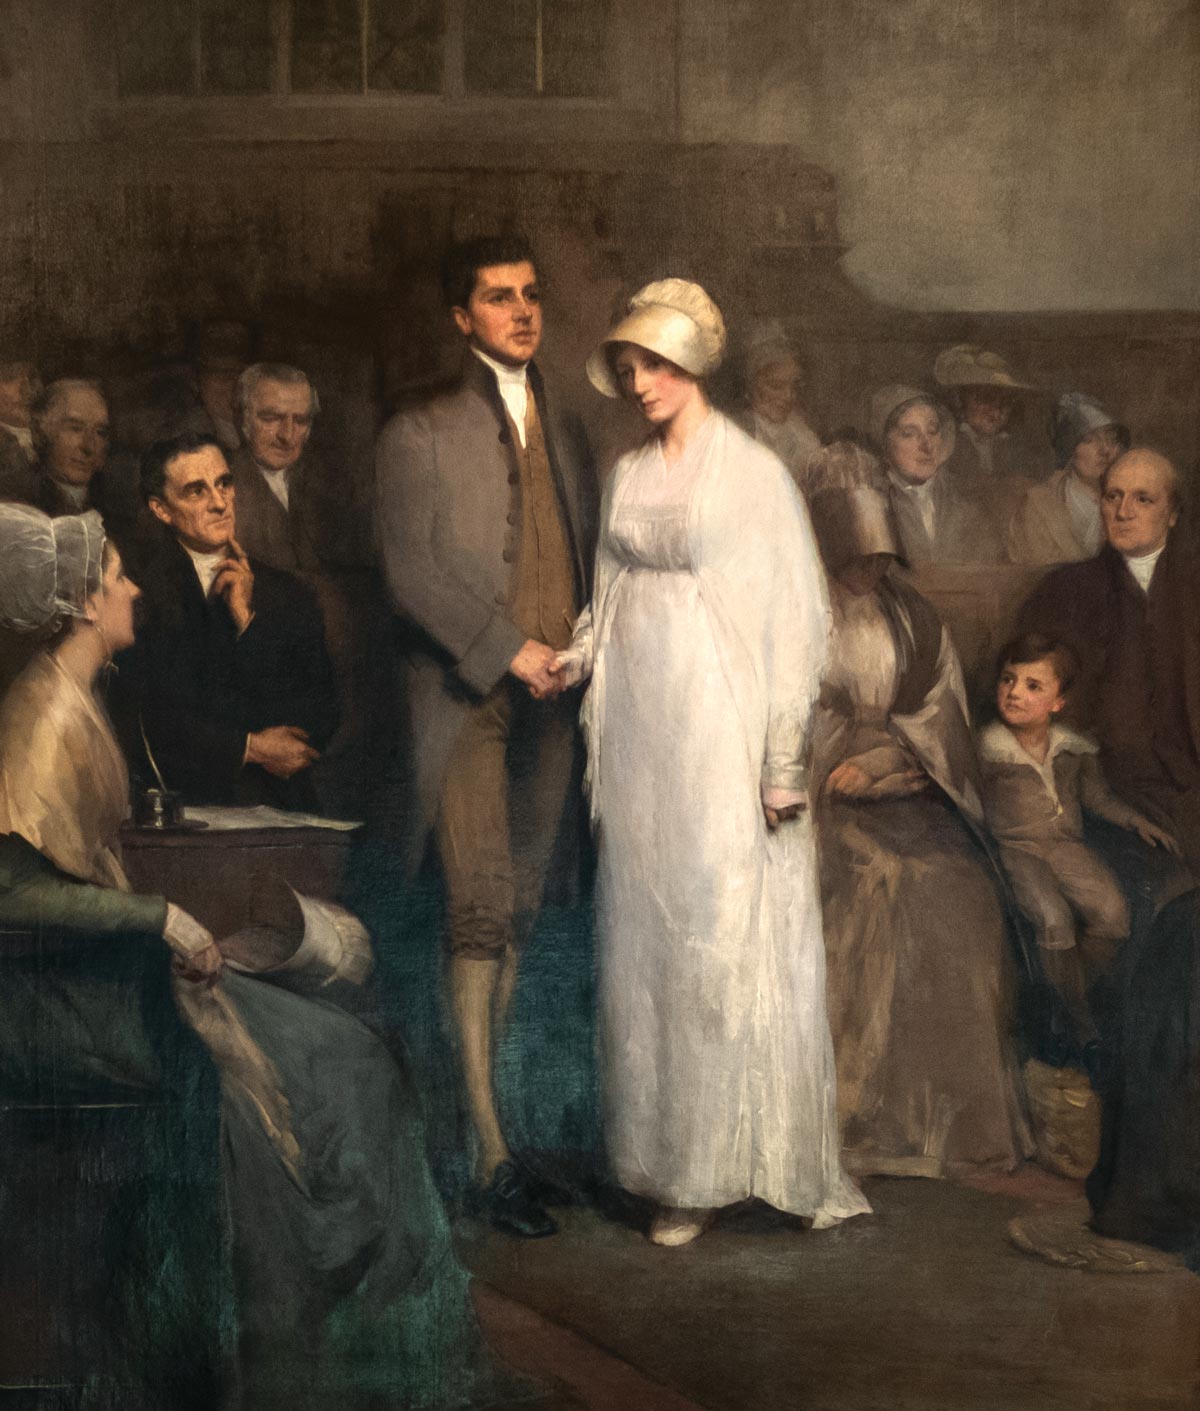 “A Quaker Wedding, 1820,” a painting of a man in a taupe 19th-century suit and a woman in a long, white dress and white bonnet, with guests surrounding them